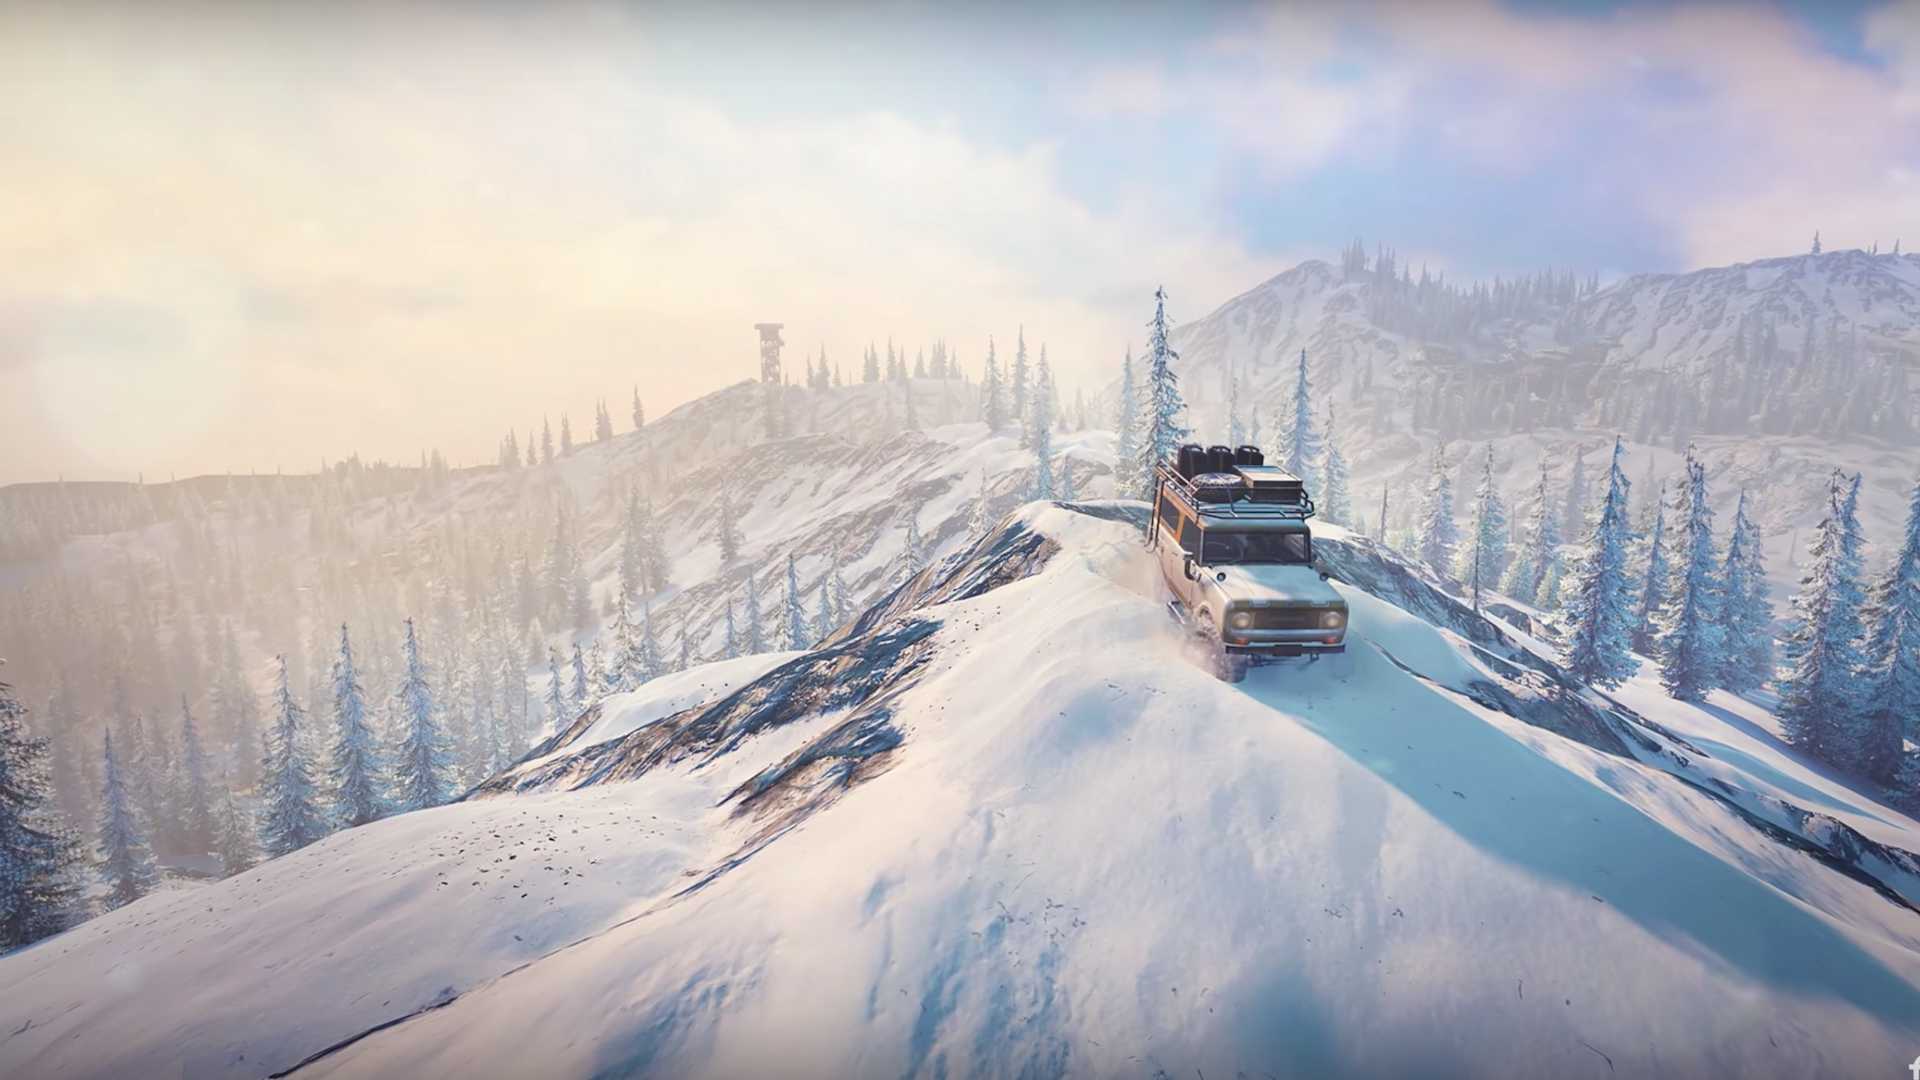 SnowRunner Is An Open World Video Game With Customizable Trucks